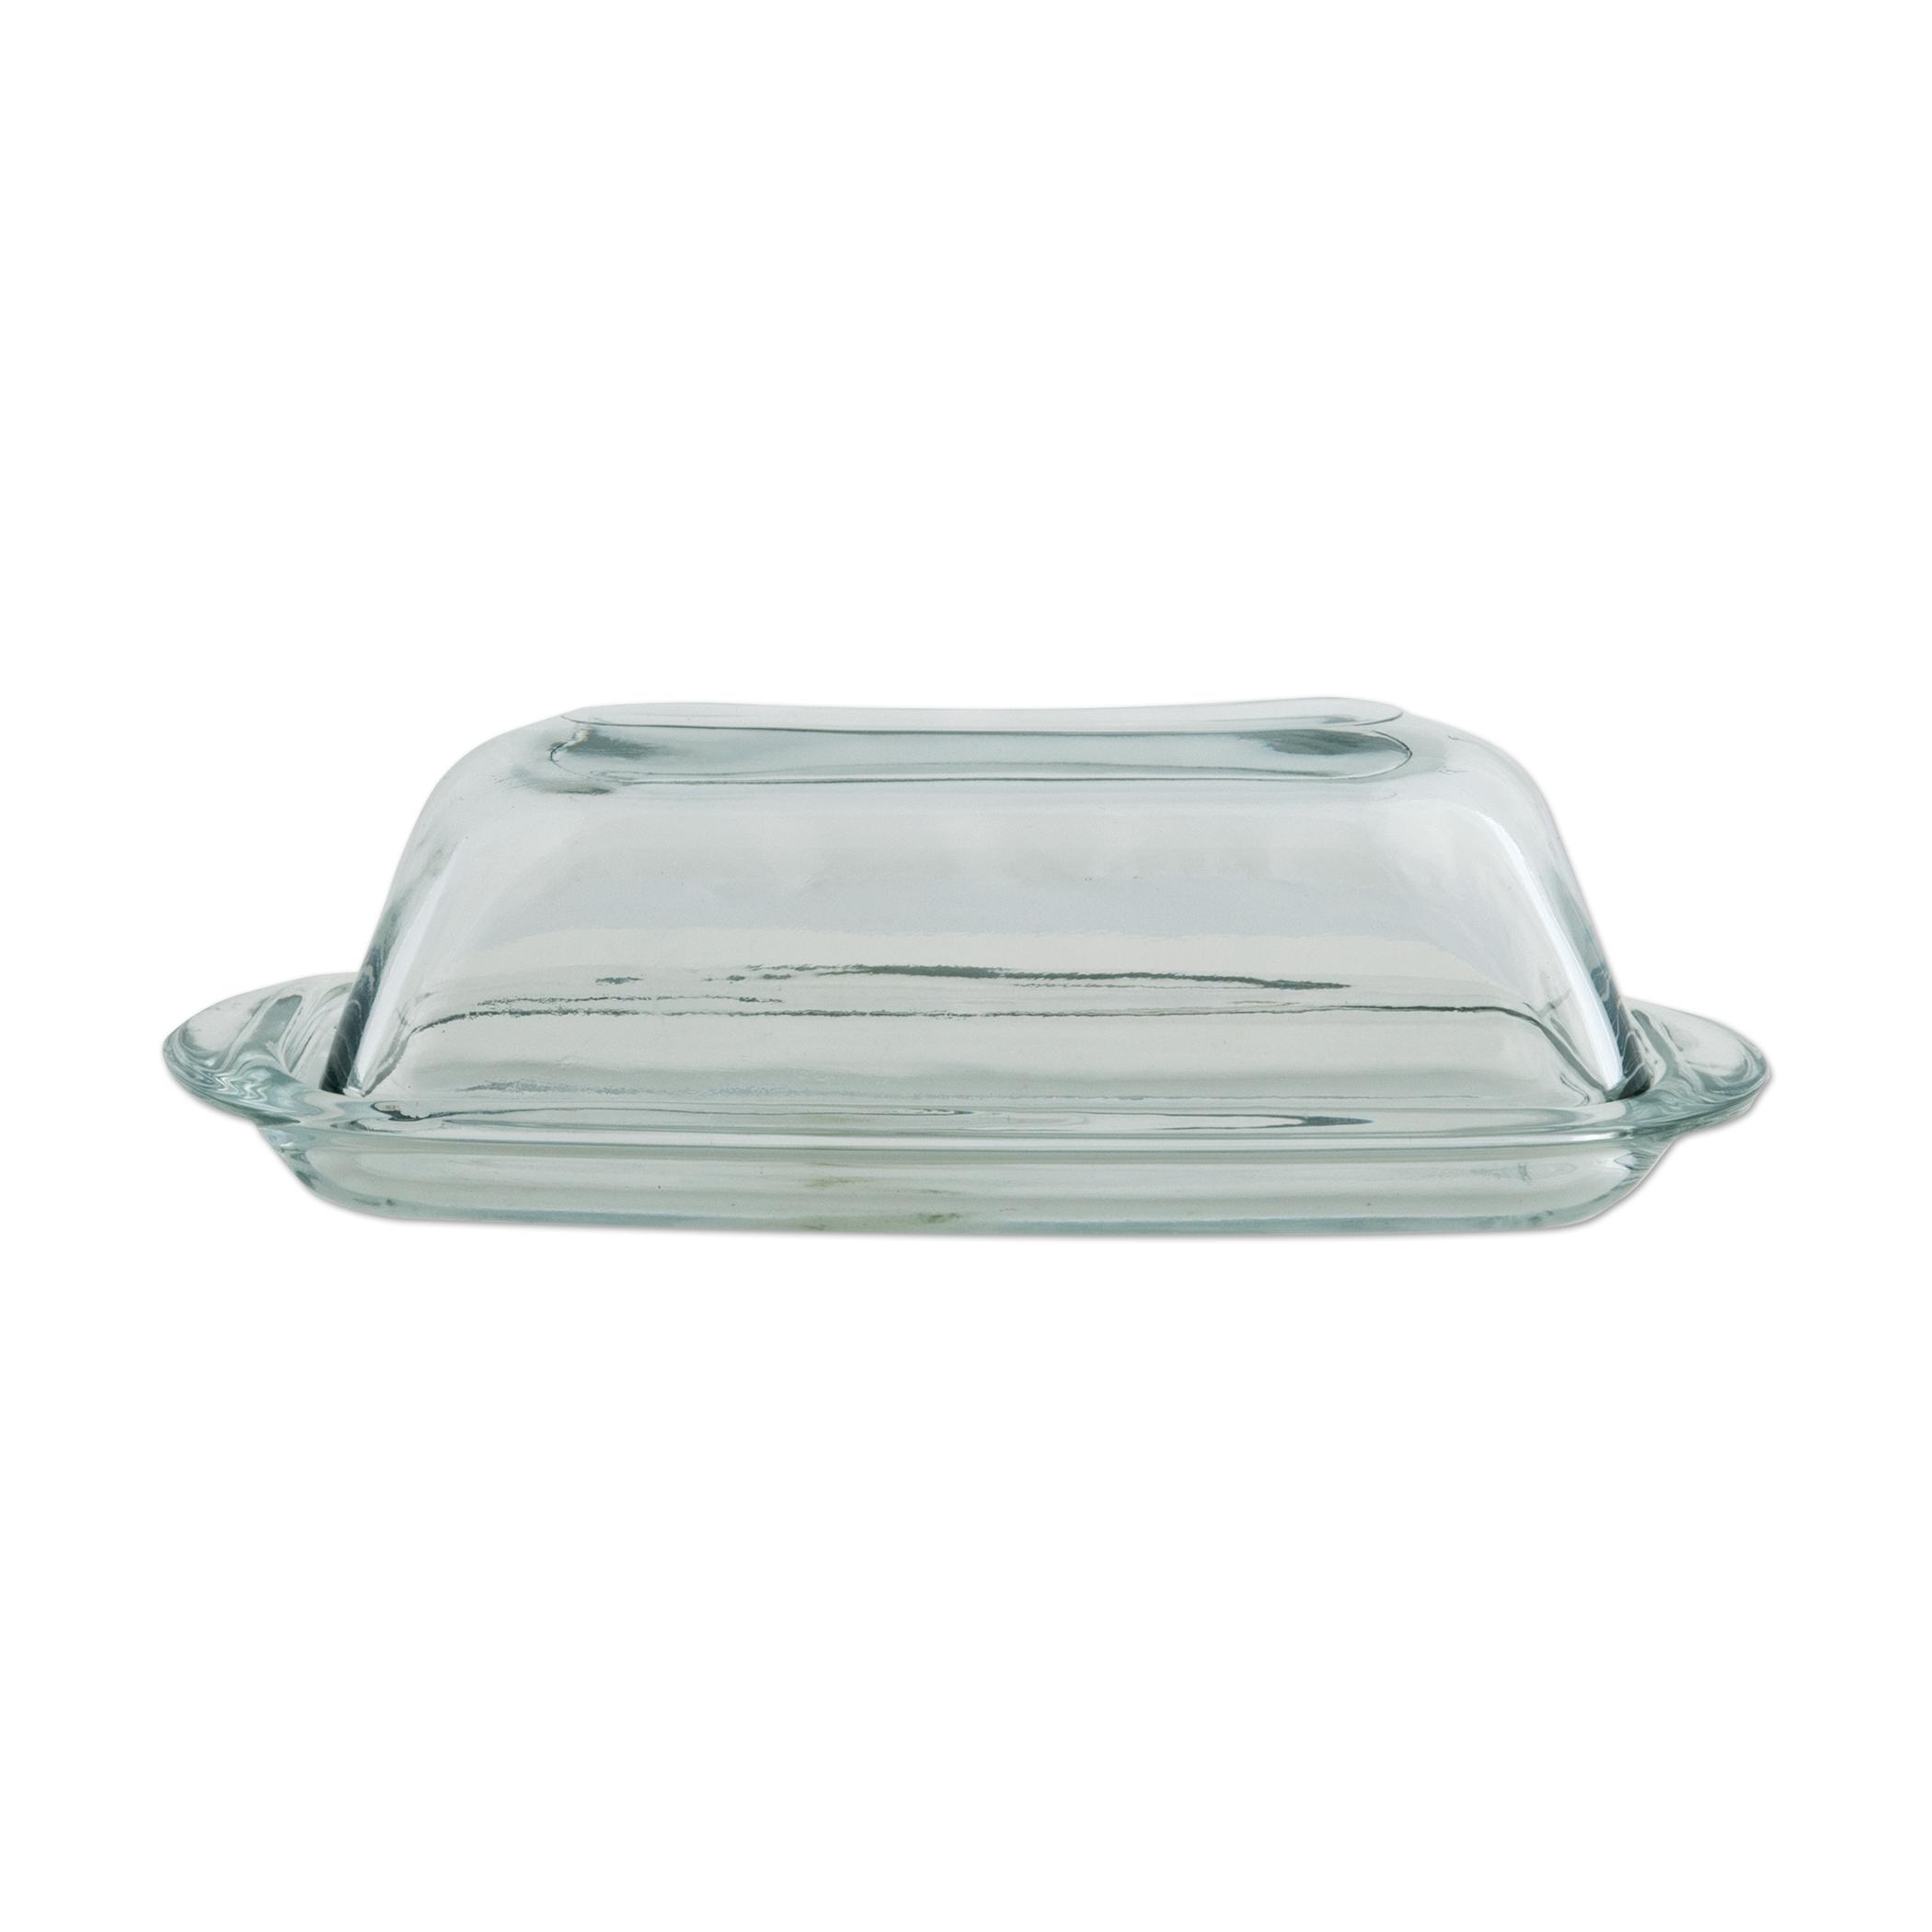  Covered Butter Dish